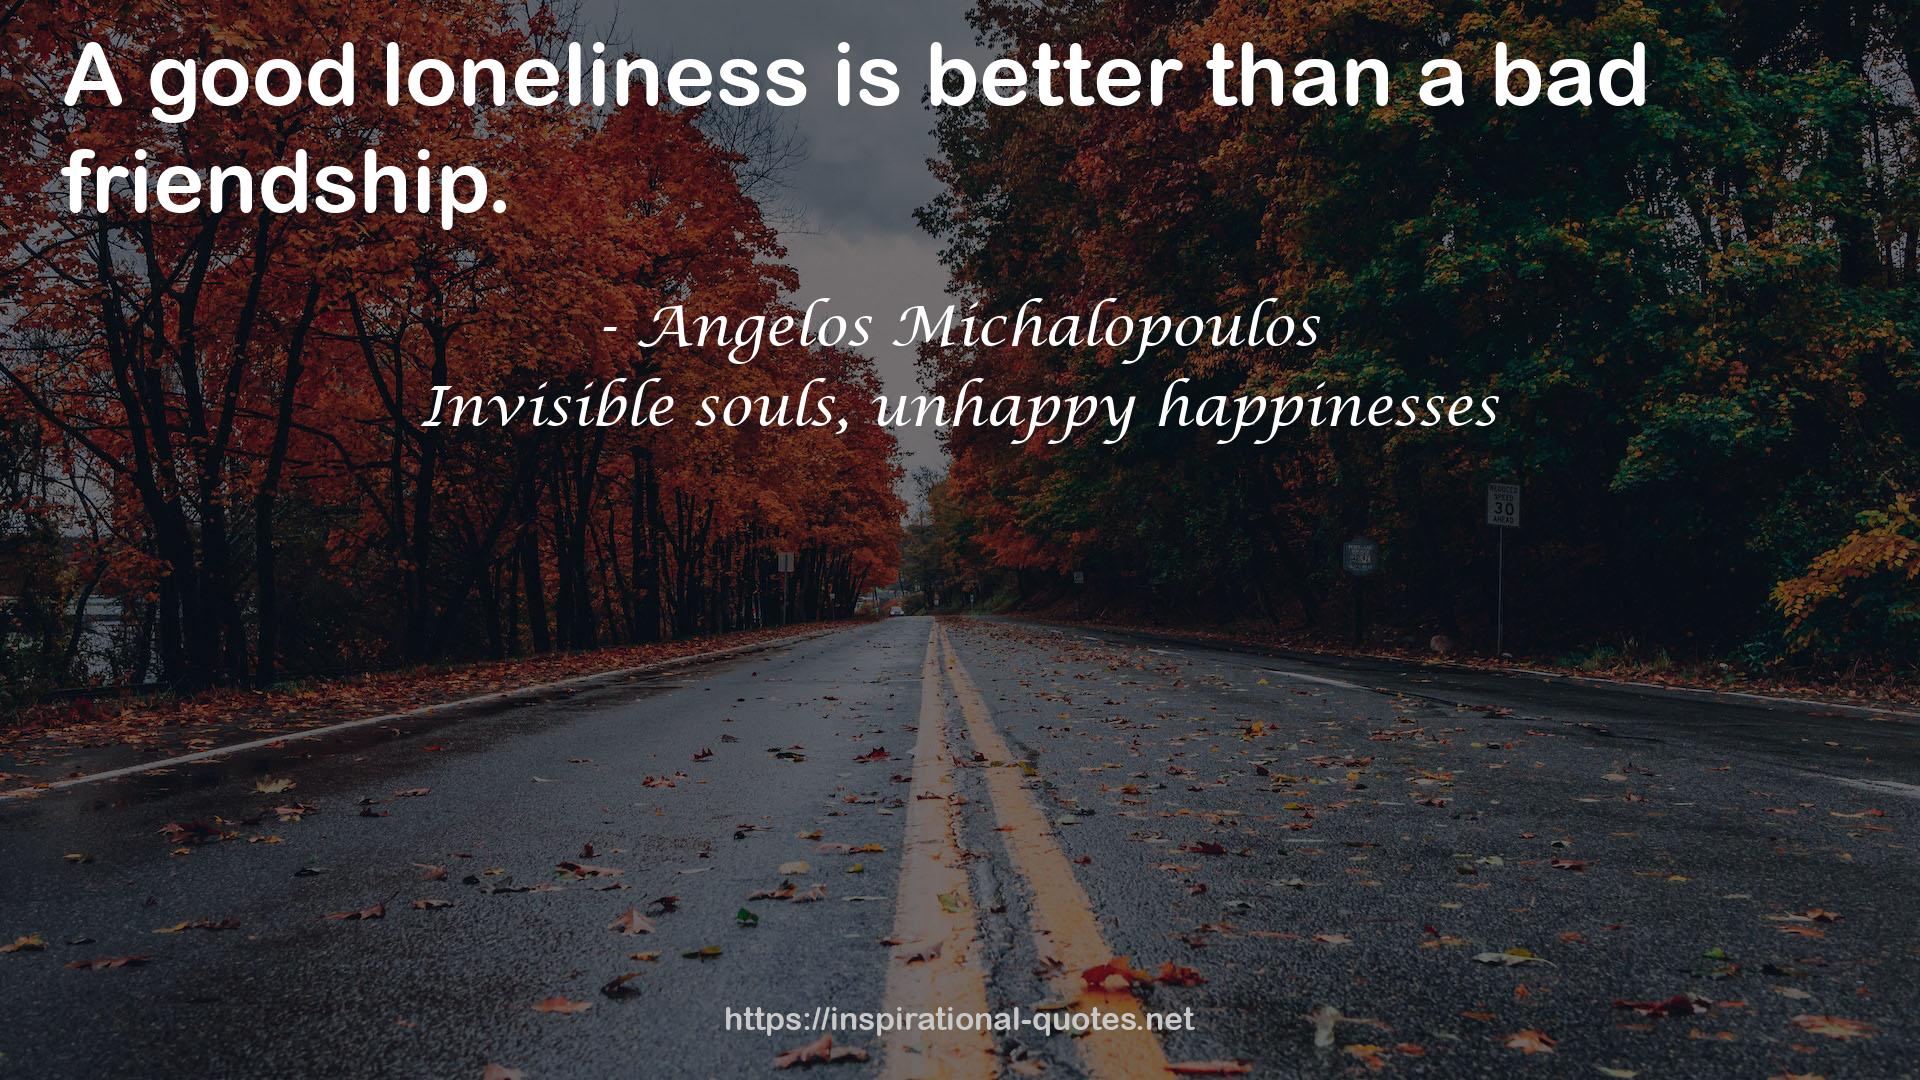 Invisible souls, unhappy happinesses QUOTES